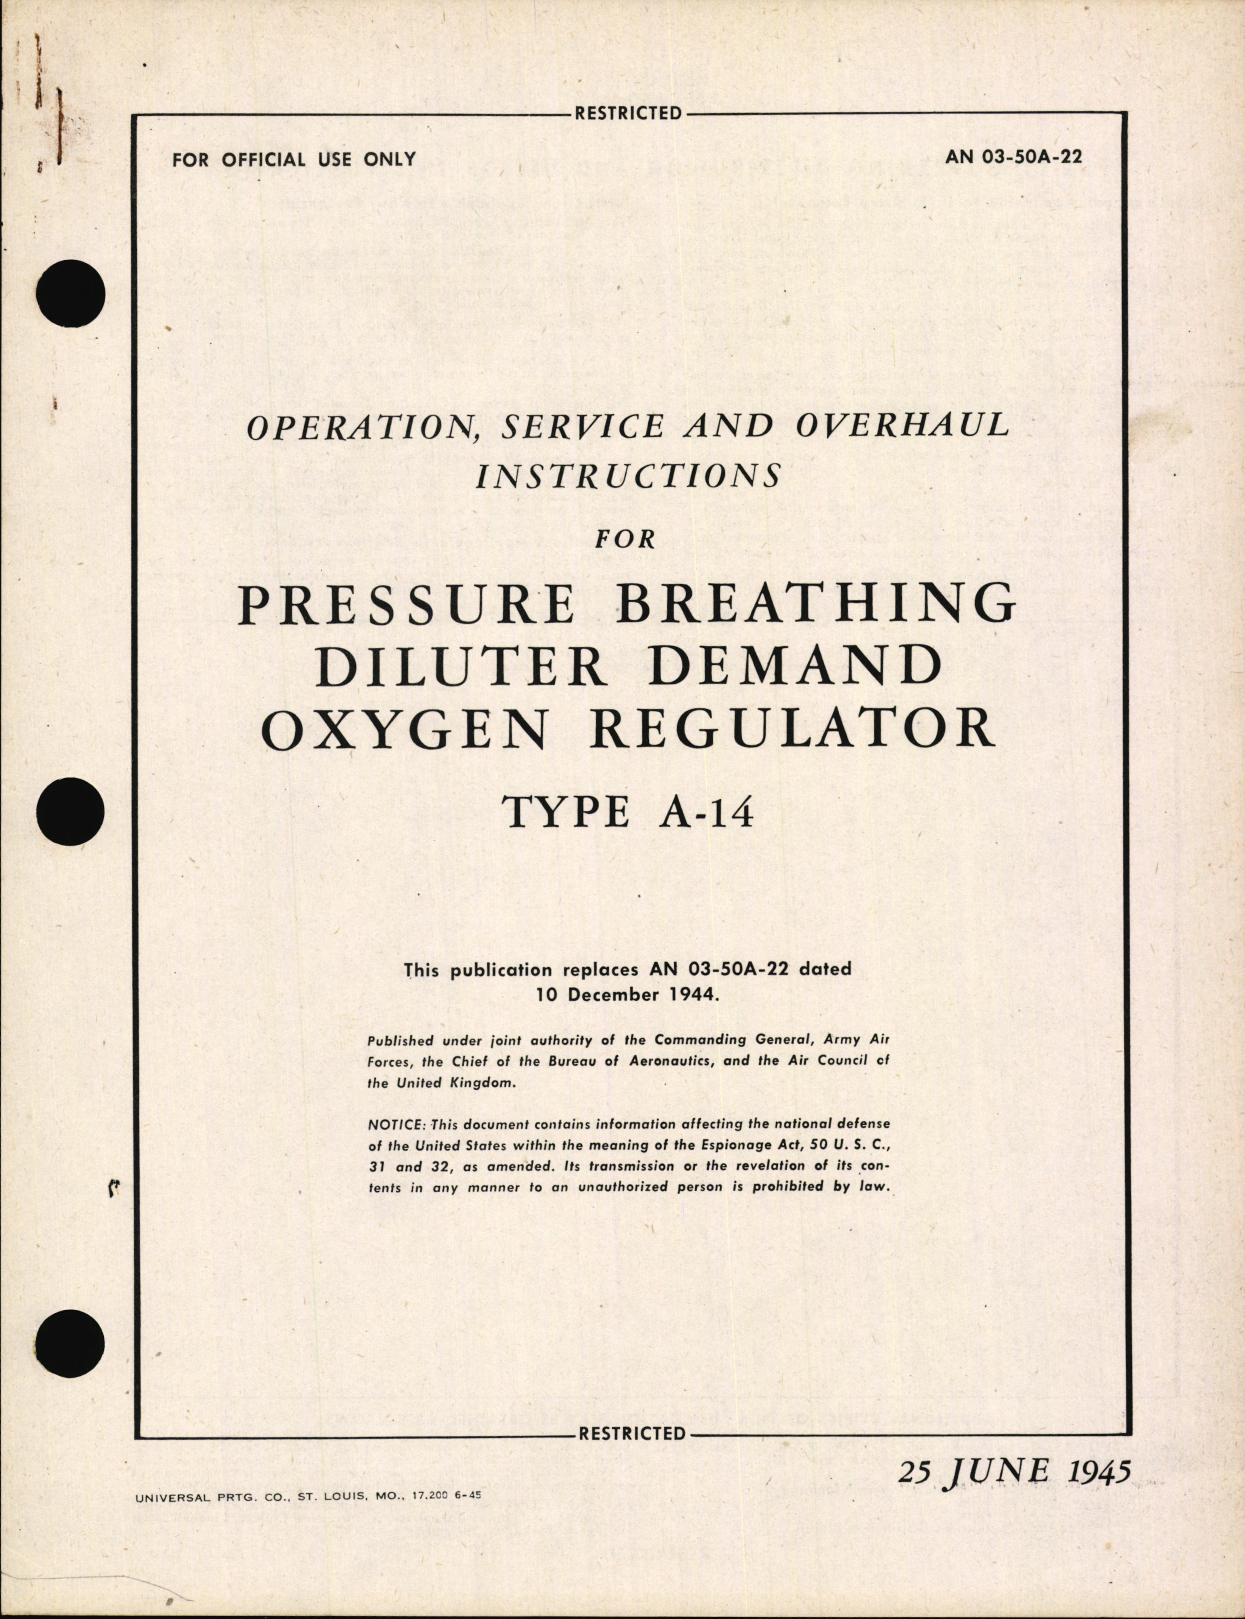 Sample page 1 from AirCorps Library document: Operation, Service and Overhaul Instructions for Pressure Breathing Diluter Demand Oxygen Regulator Type A-14